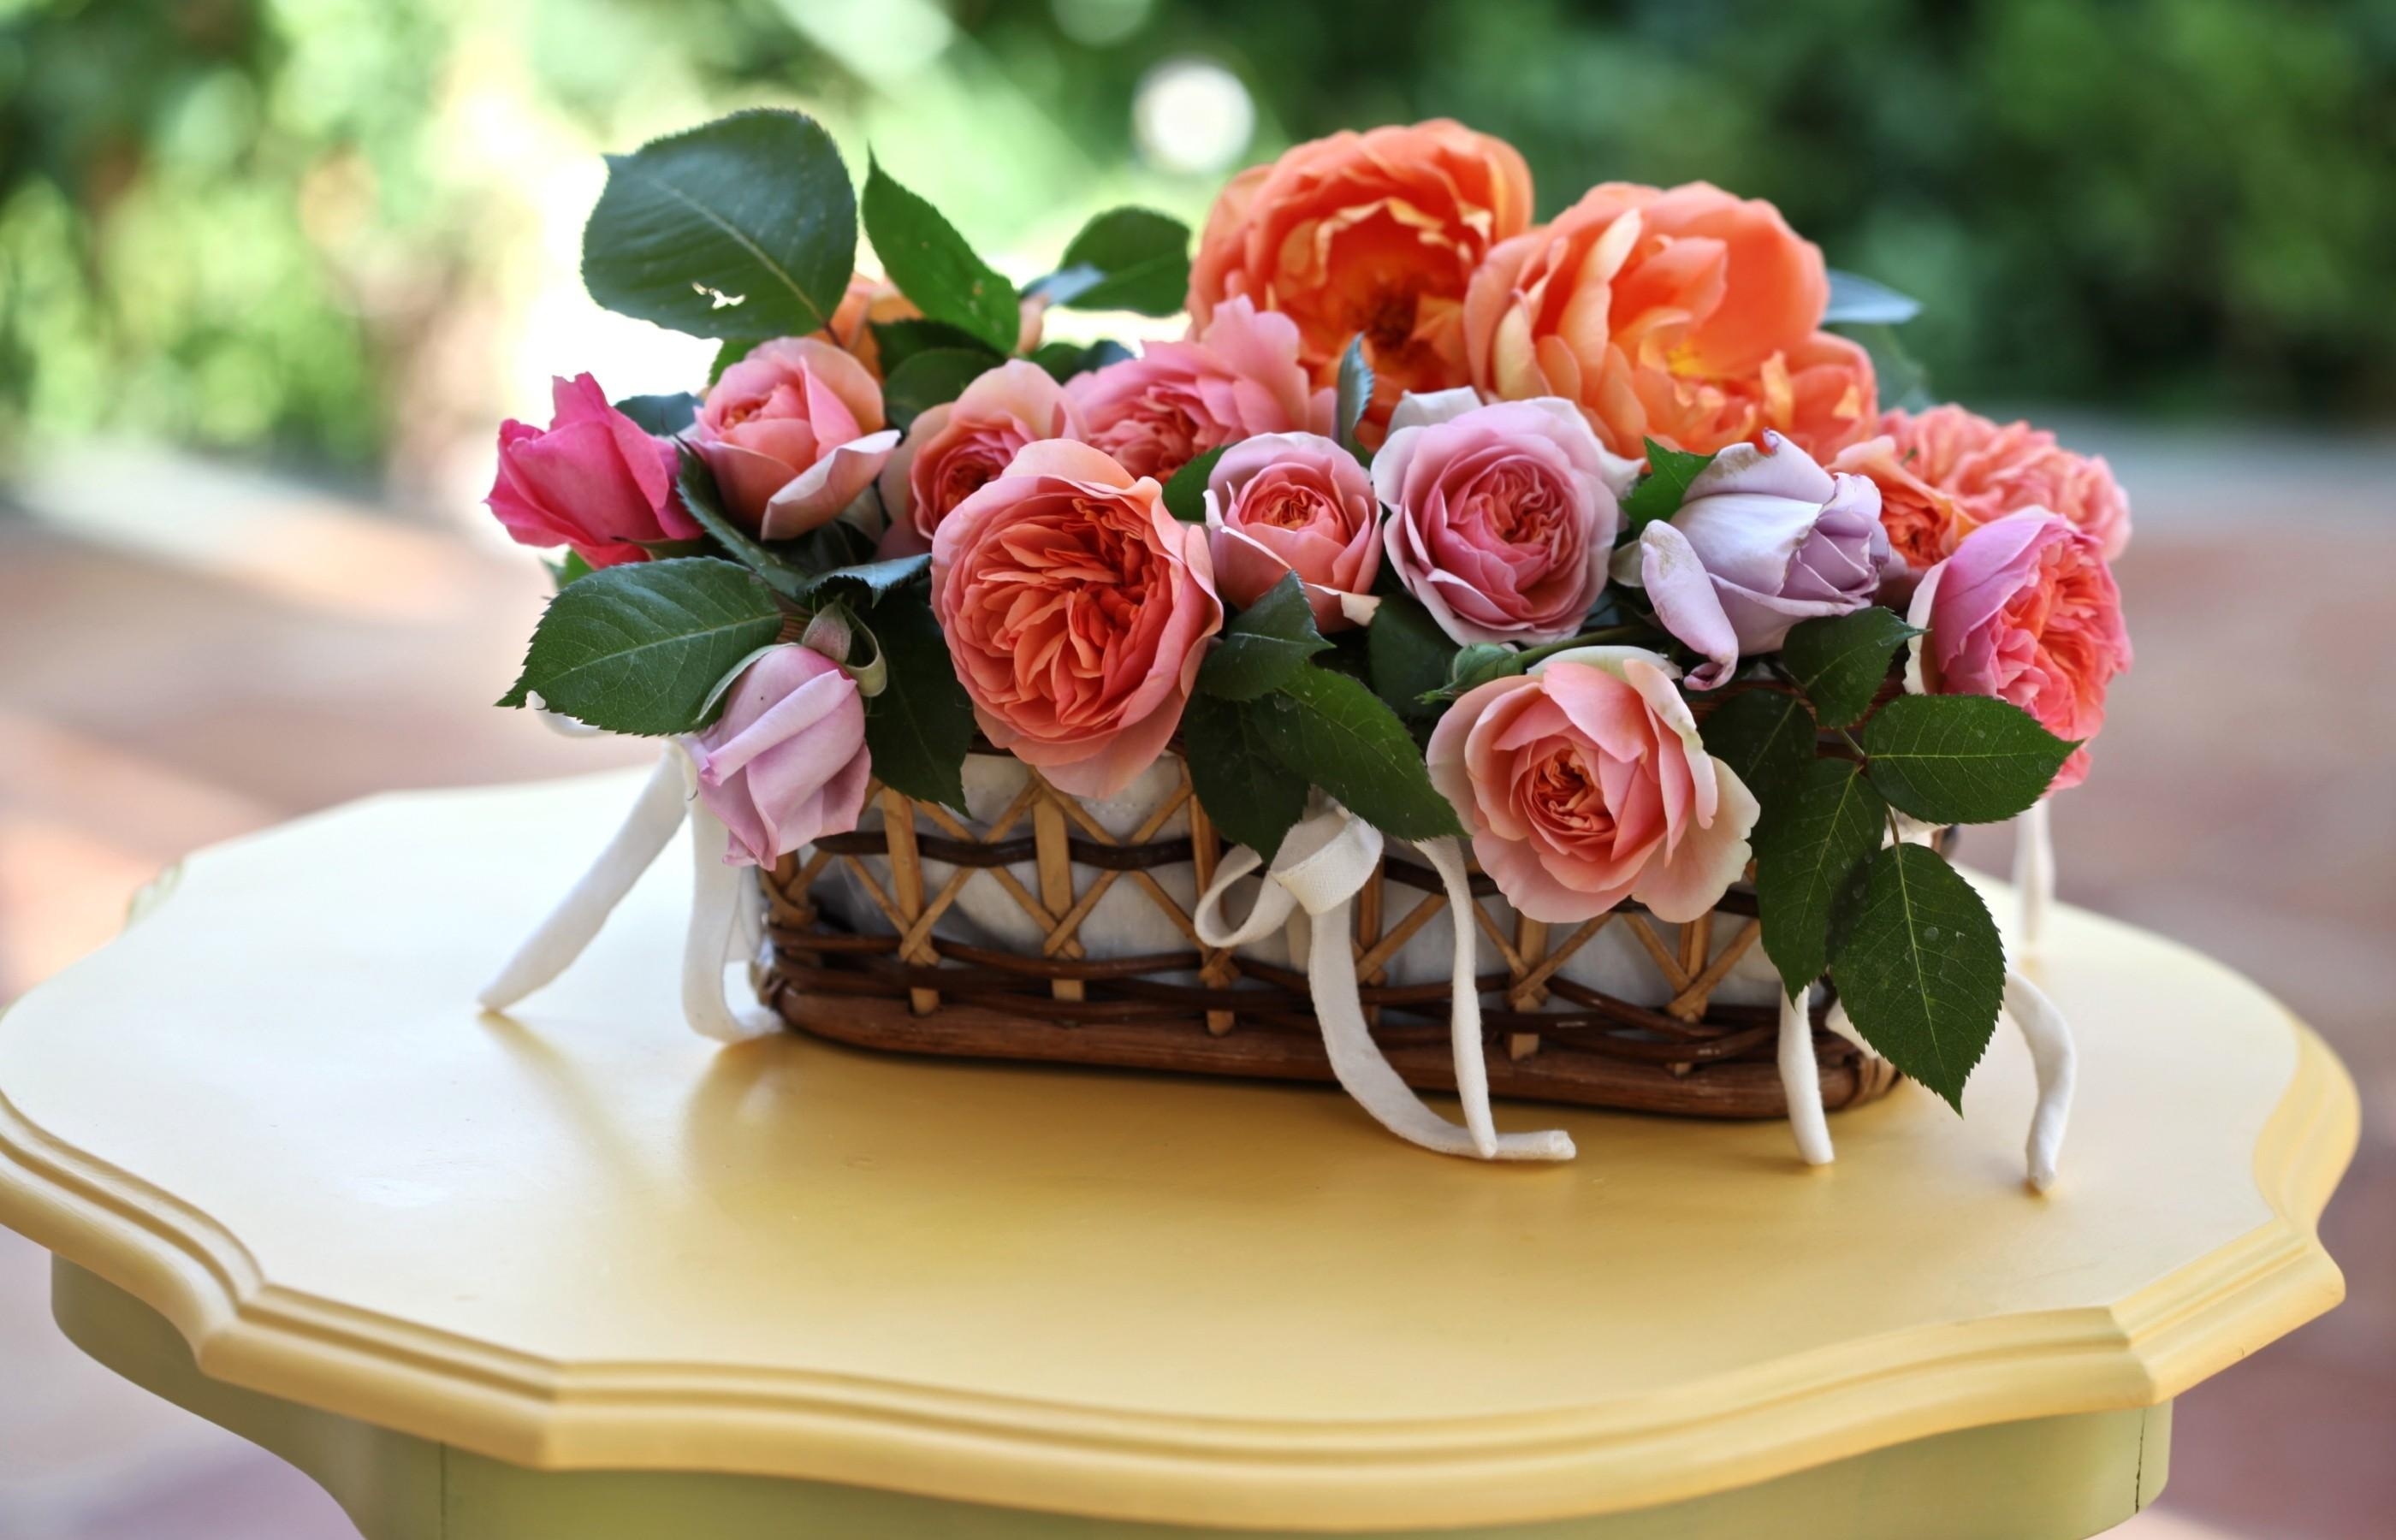 flowers, roses, leaves, table, disbanded, loose, basket cellphone